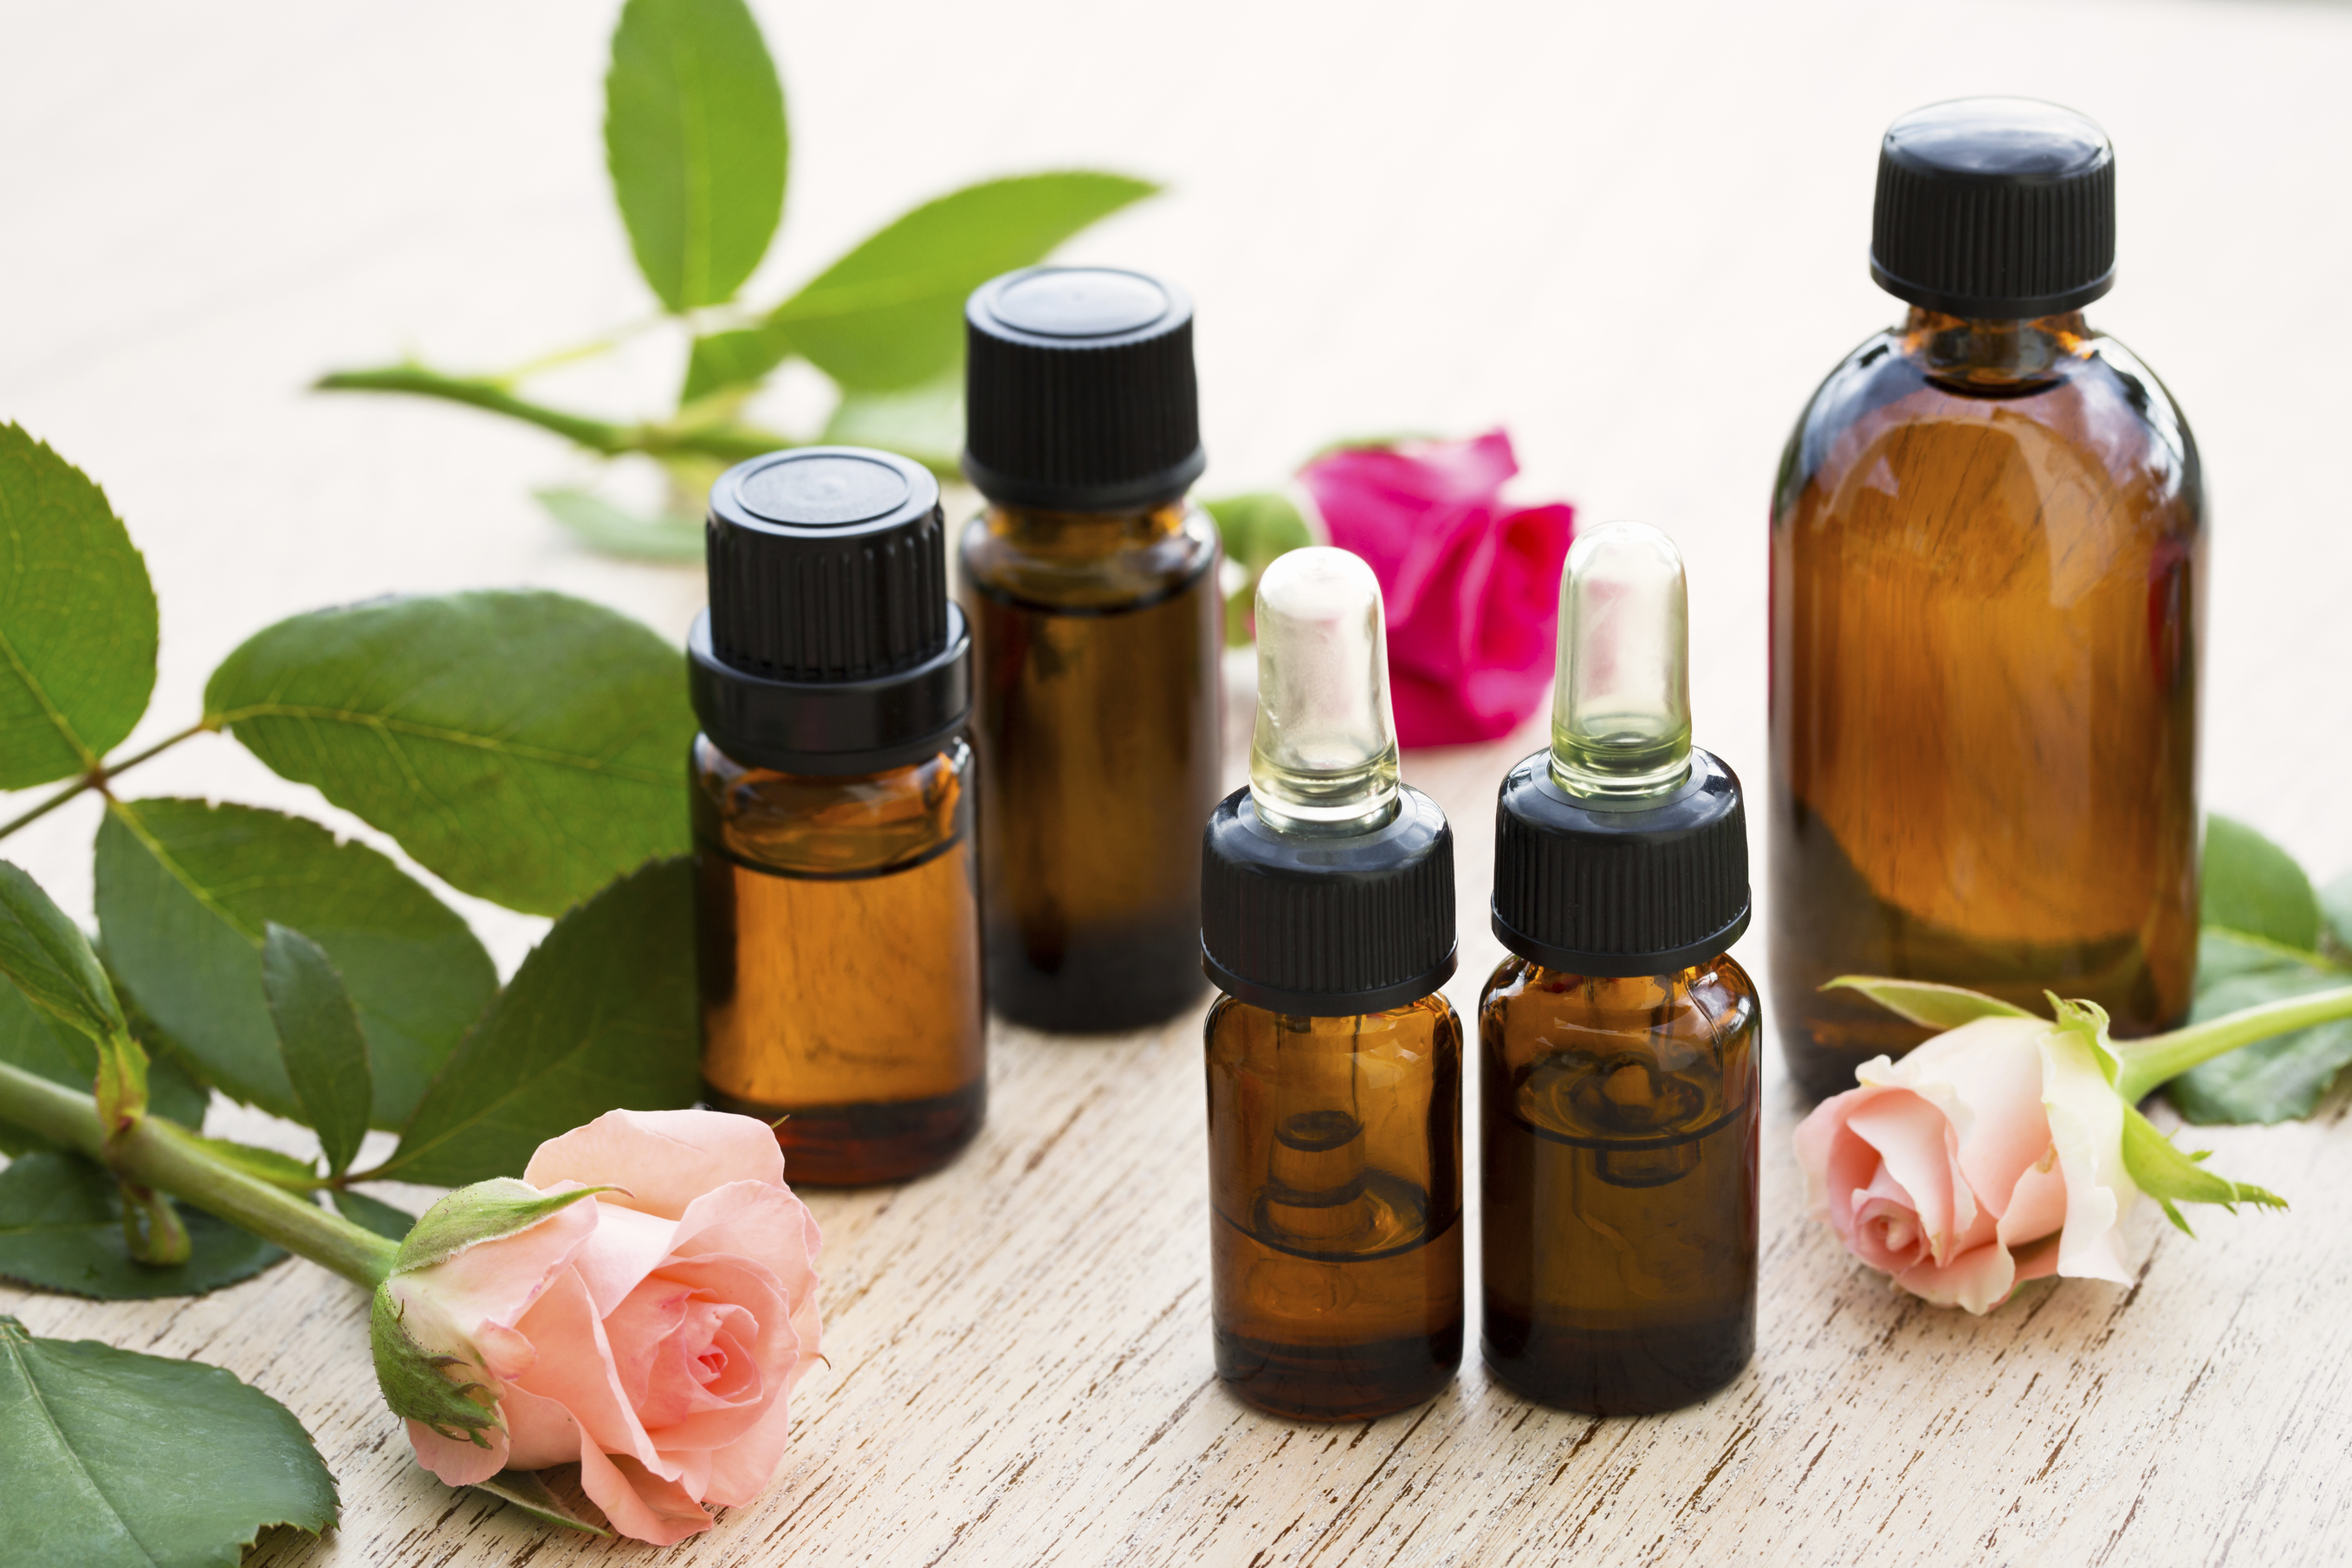 Does Aromatherapy Work In Recovery?